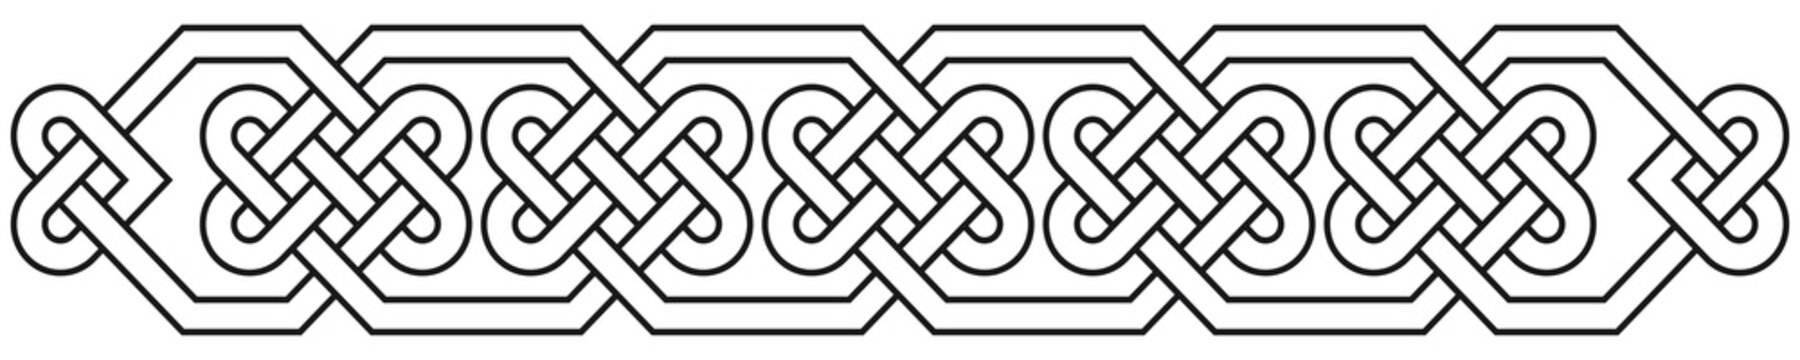 Celtic knot band. Linear border made with Celtic knots for use in designs for St. Patrick's Day.